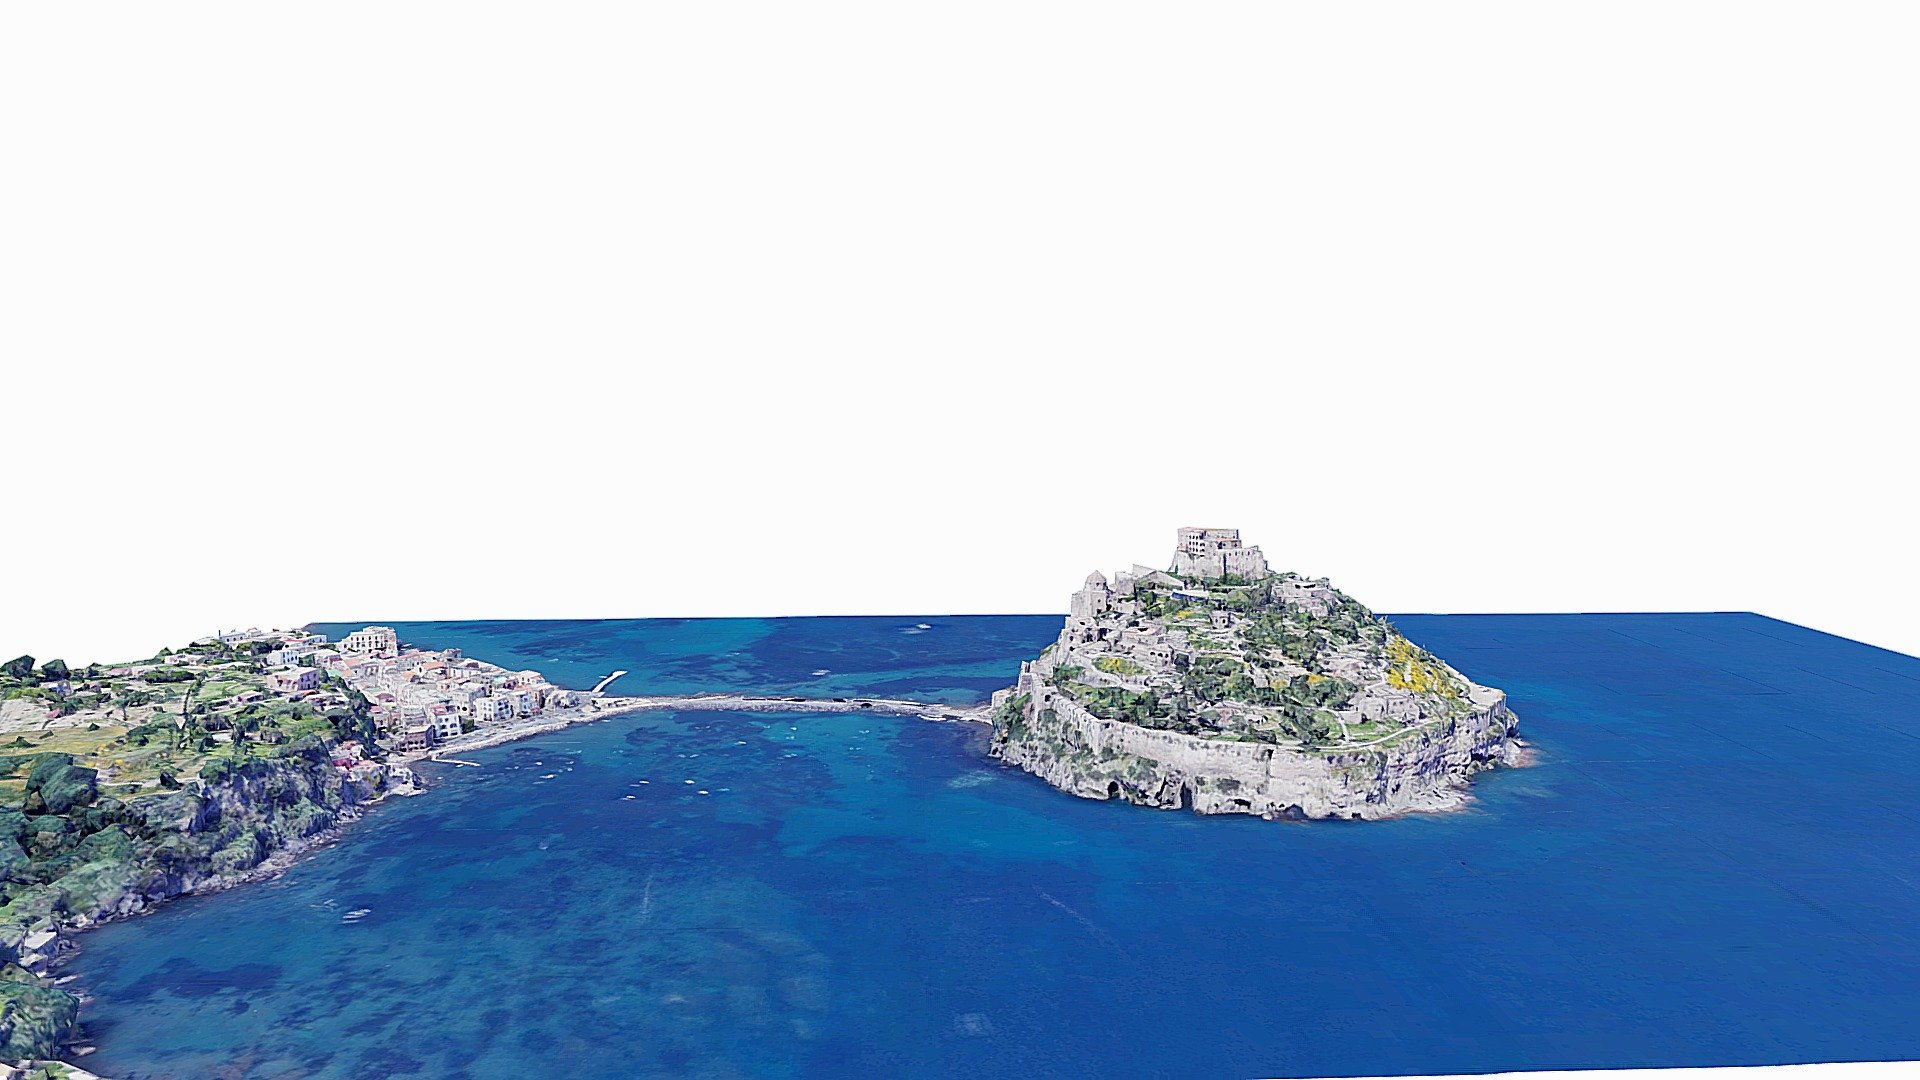 If someone is interested in the model, you can contact me through the following email potorro44@hotmail.com

Aragonese Castle (Italian: Castello Aragonese) is a medieval castle next to Ischia (one of the Phlegraean Islands), at the northern end of the Gulf of Naples, Italy.[1] The castle stands on a volcanic rocky islet that connects to the larger island of Ischia by a causeway (Ponte Aragonese).

The castle was built by Hiero I of Syracuse in 474 BC. At the same time, two towers were built to control enemy fleets' movements. The rock was then occupied by Parthenopeans (the ancient inhabitants of Naples). In 326 BC the fortress was captured by Romans, and then again by the Parthenopeans. In 1441 Alfonso V of Aragon connected the rock to the island with a stone bridge instead of the prior wood bridge, and fortified the walls in order to defend the inhabitants against the raids of pirates 3d model